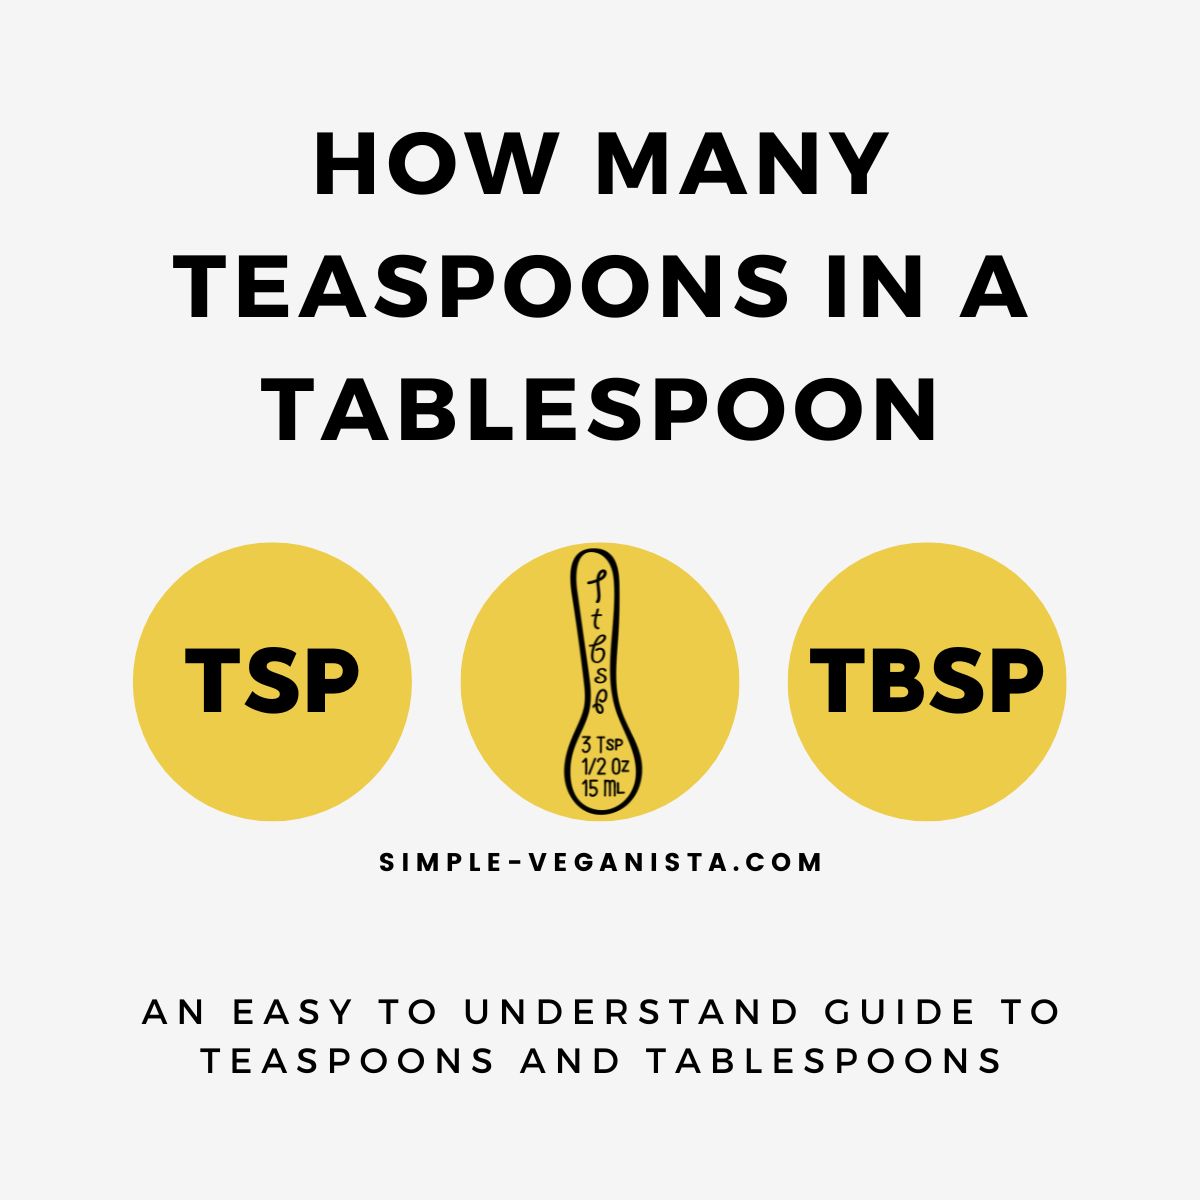 https://simple-veganista.com/wp-content/uploads/2023/03/how-many-teaspoons-in-a-tablespoon-featured-image-.jpg